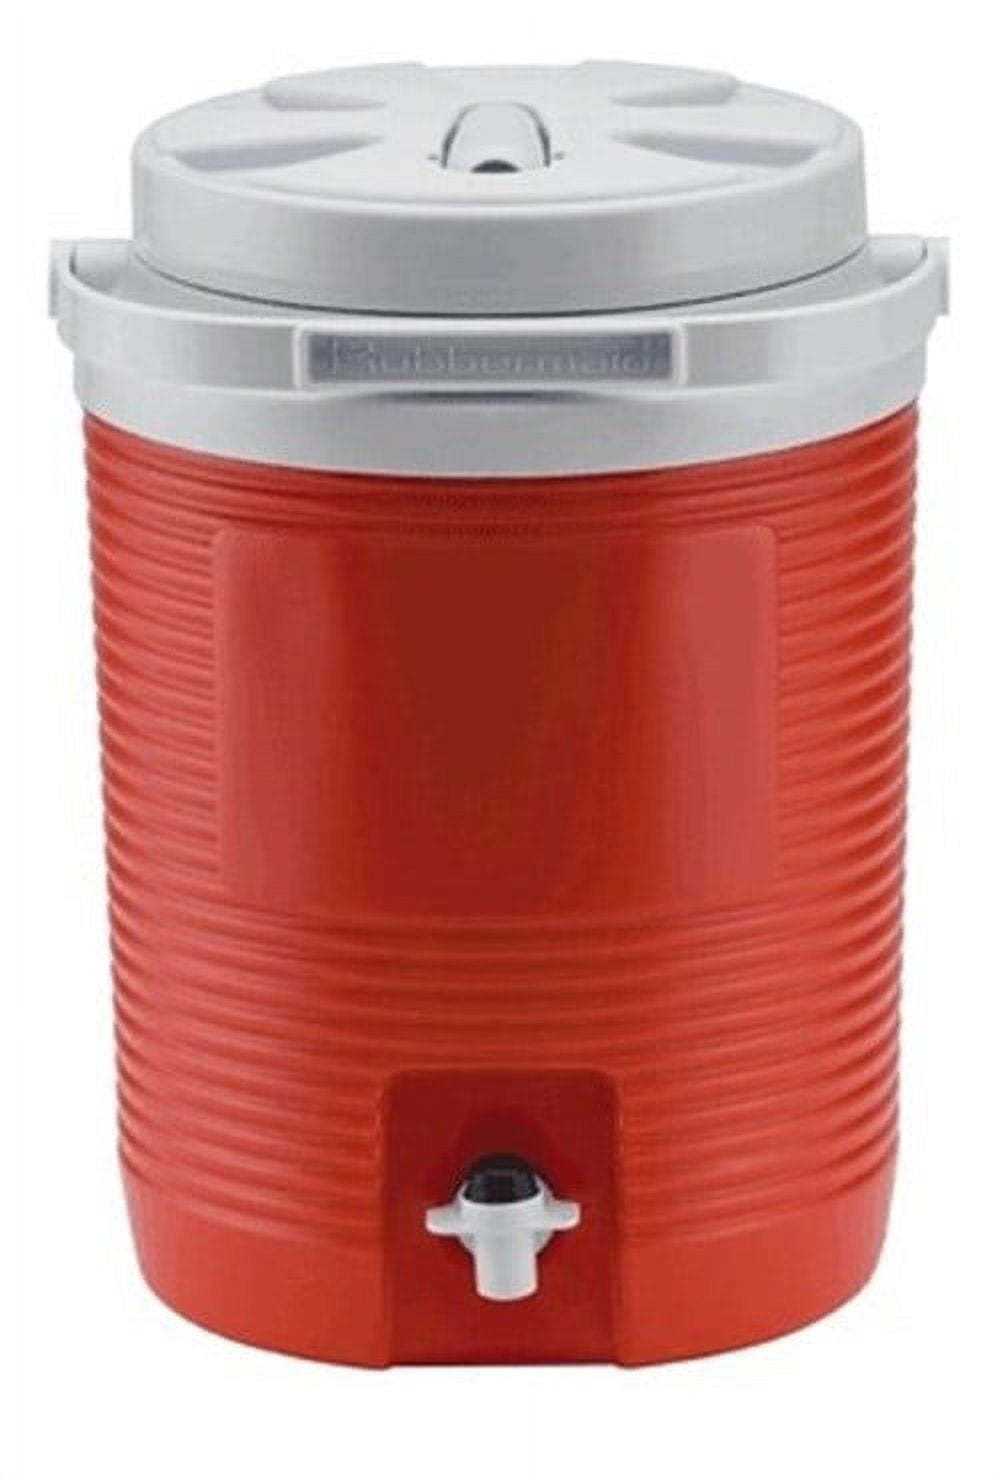 Rubbermaid Victory 2 Gal. Red Cooler FG153004MODRD - The Home Depot